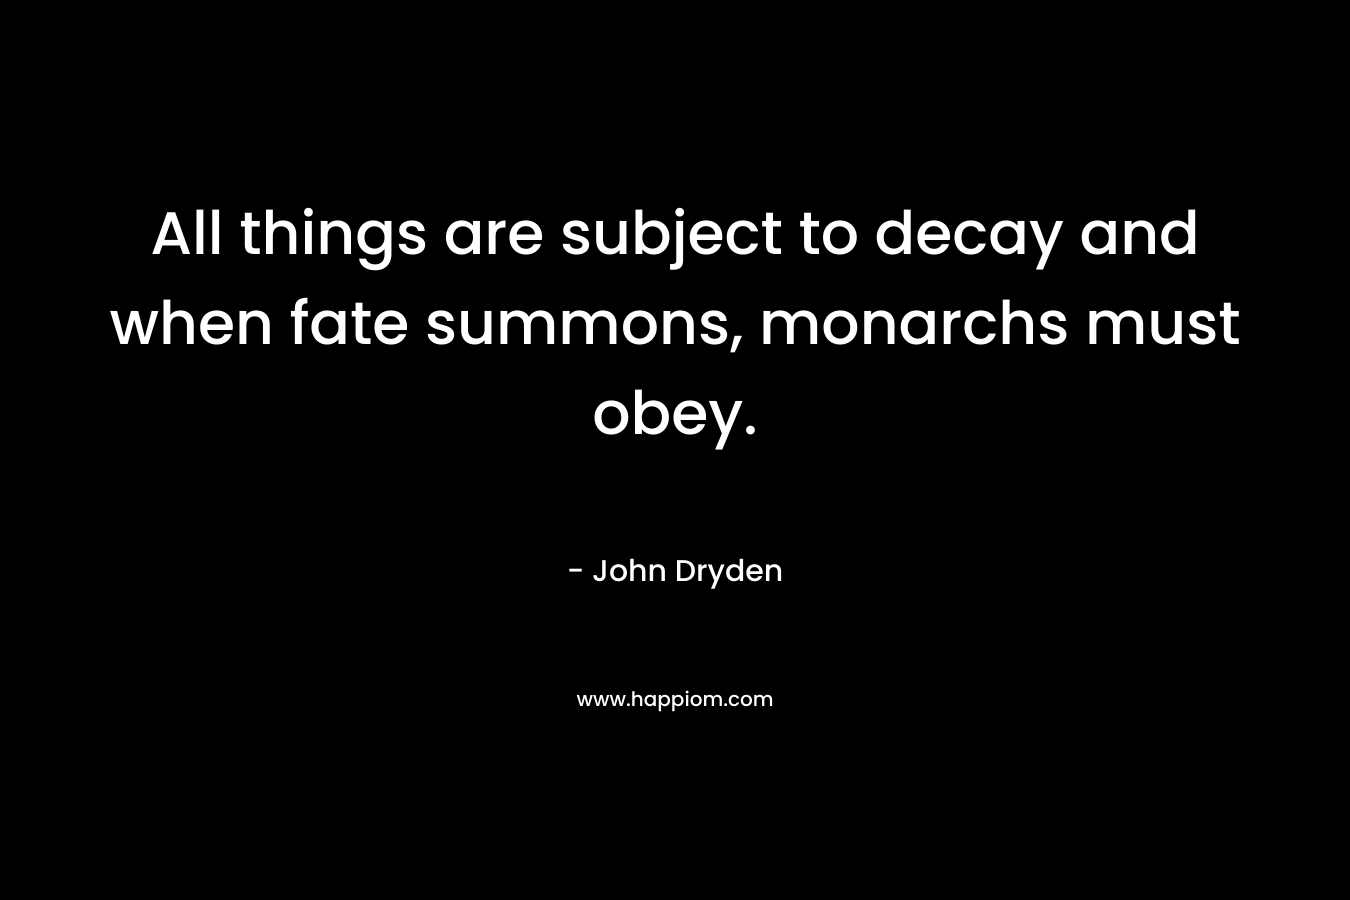 All things are subject to decay and when fate summons, monarchs must obey. – John Dryden